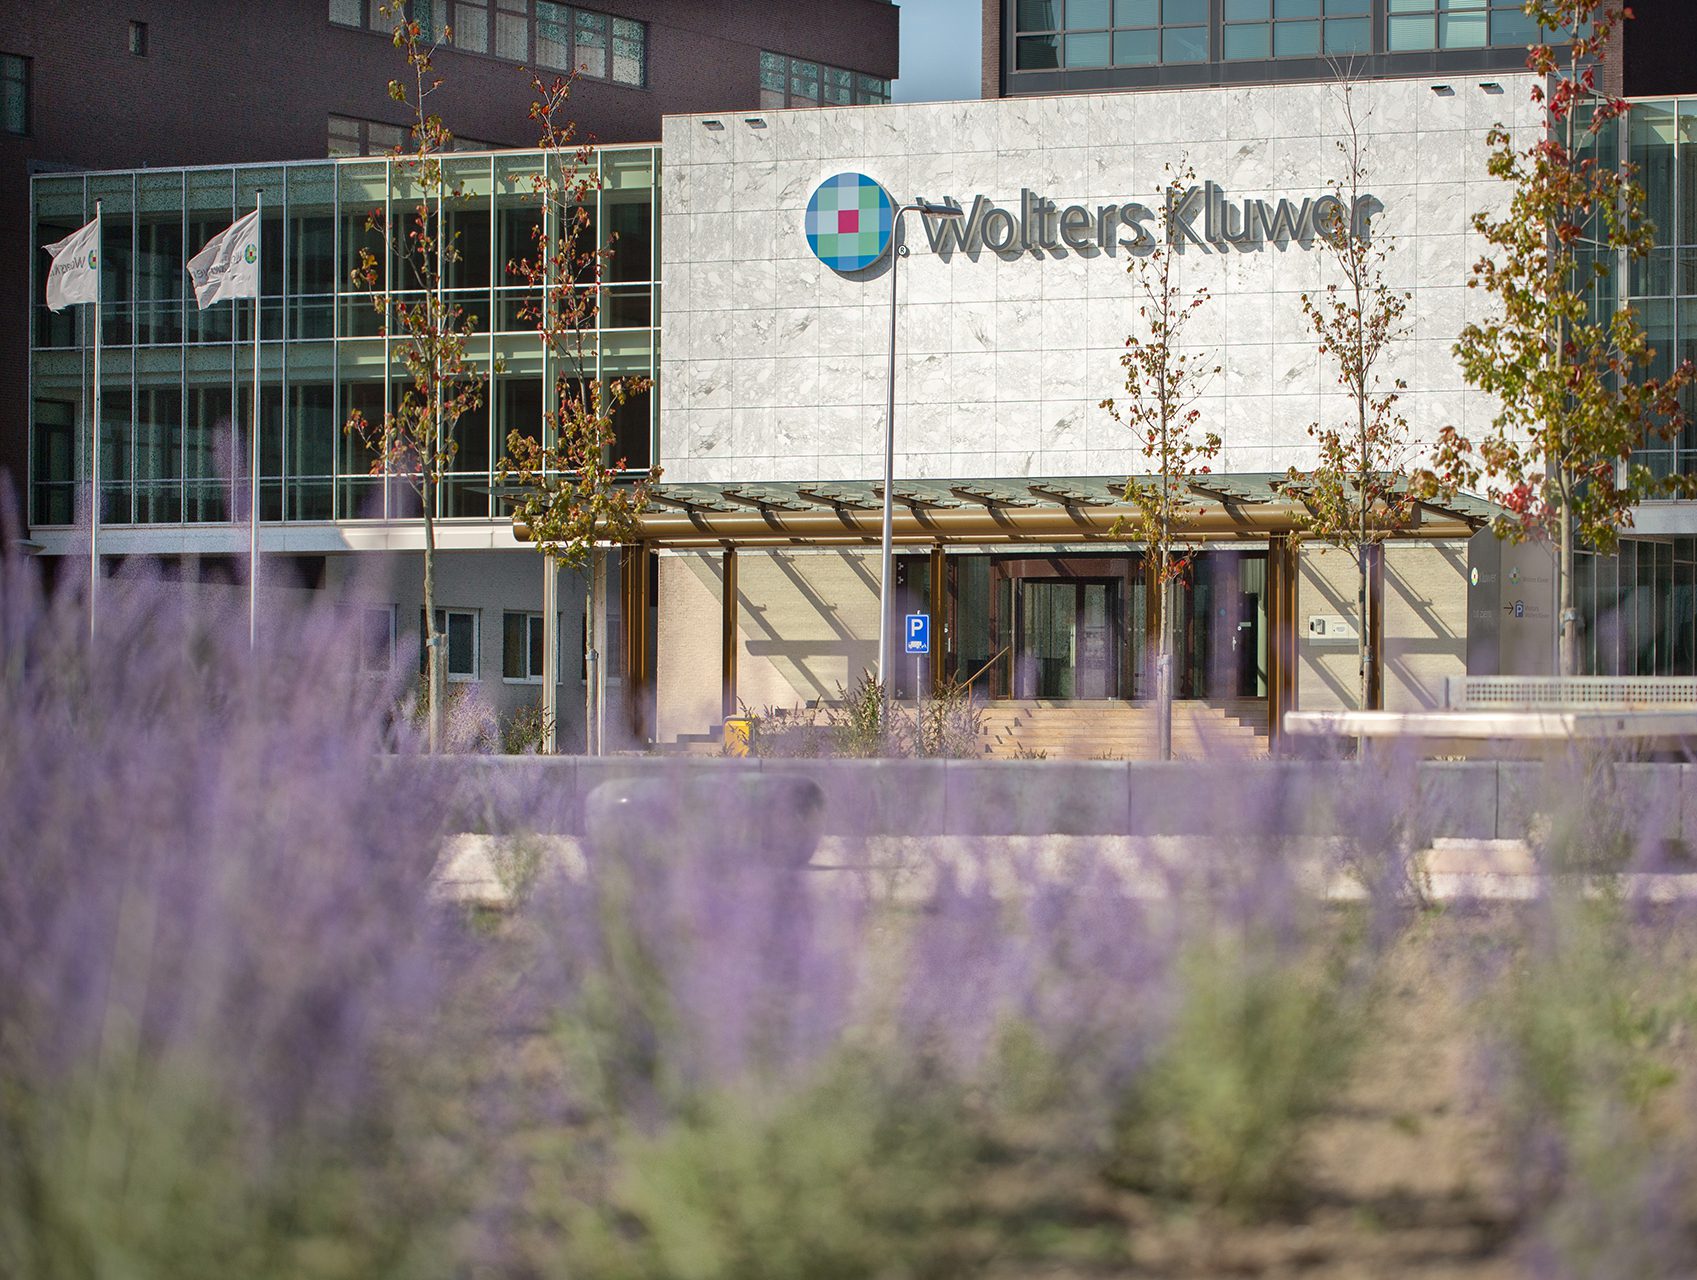 Employee engagement is one challenge for CEOs, especially in a tight-labor economy. Here's what the CEO of Wolters Kluwer Tax and Accounting does.